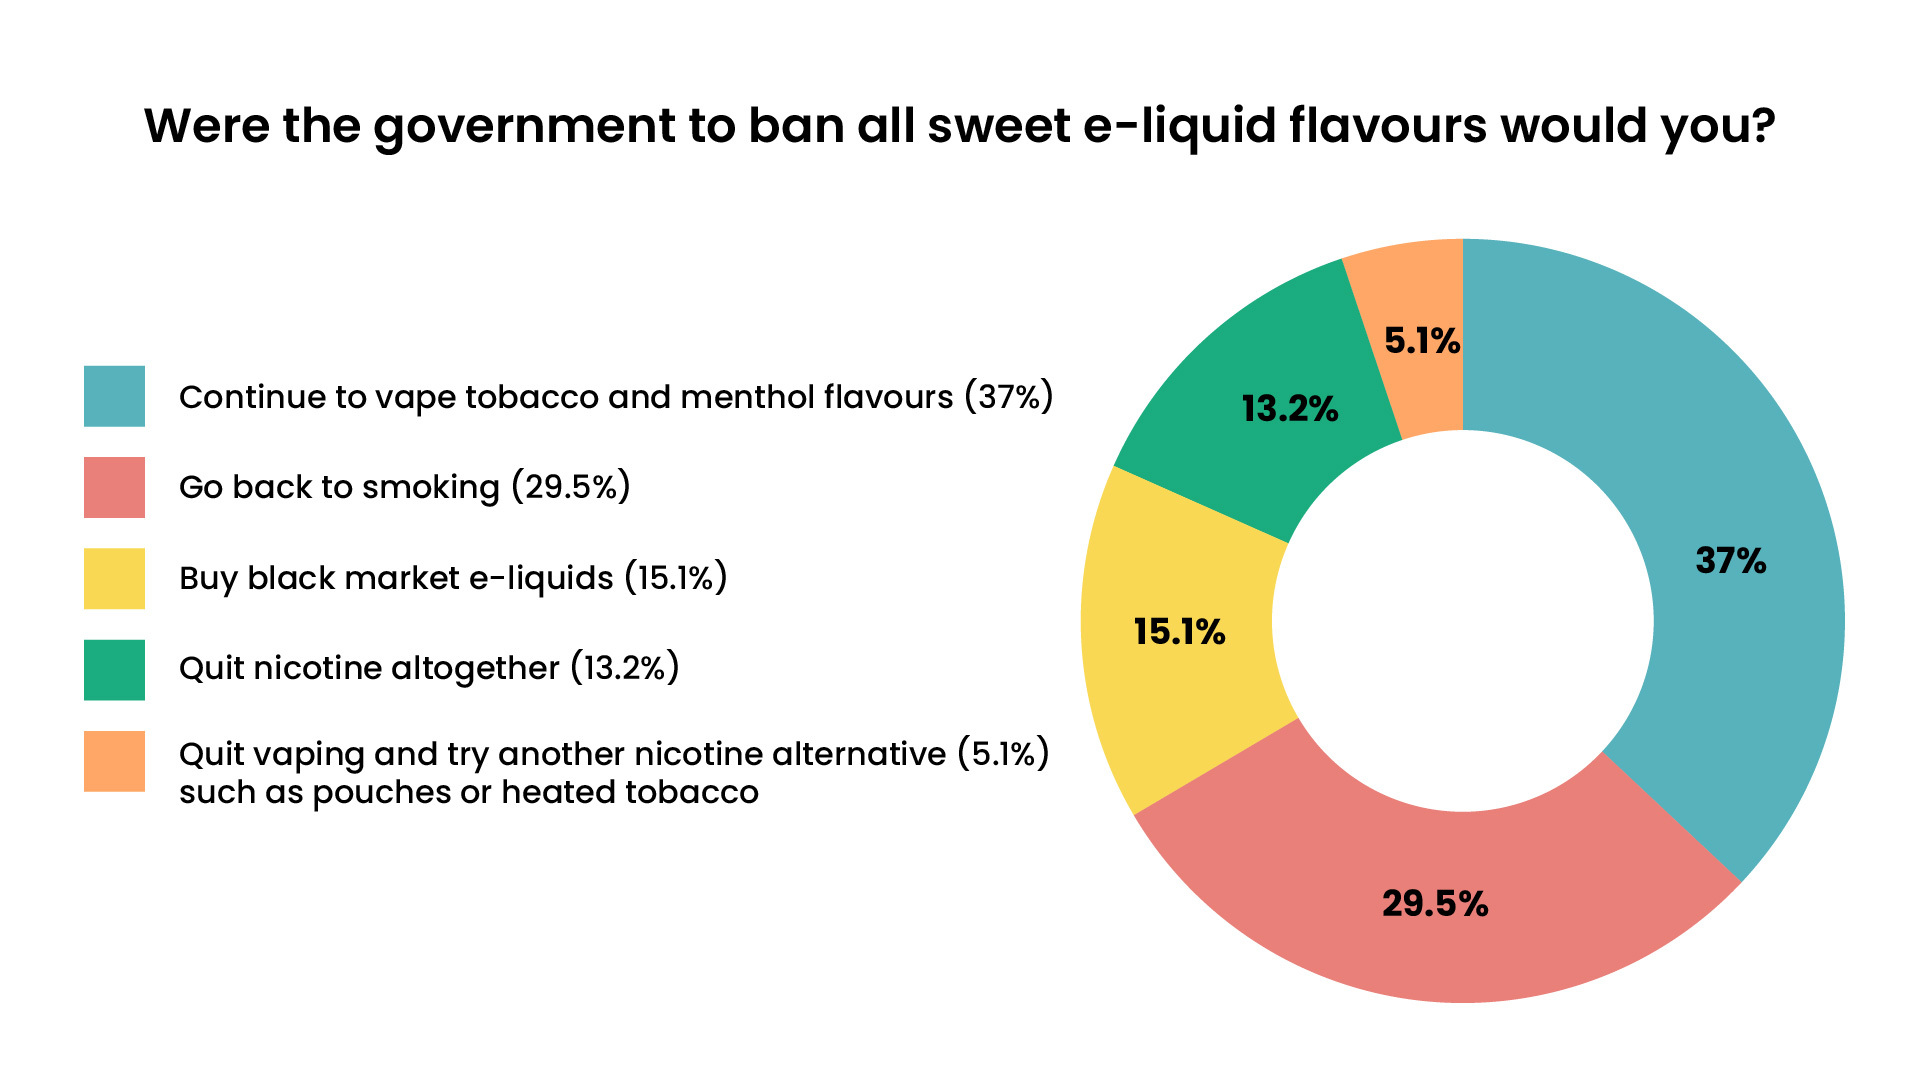 A survey showing responses to the governments proposed ban on vape flavours